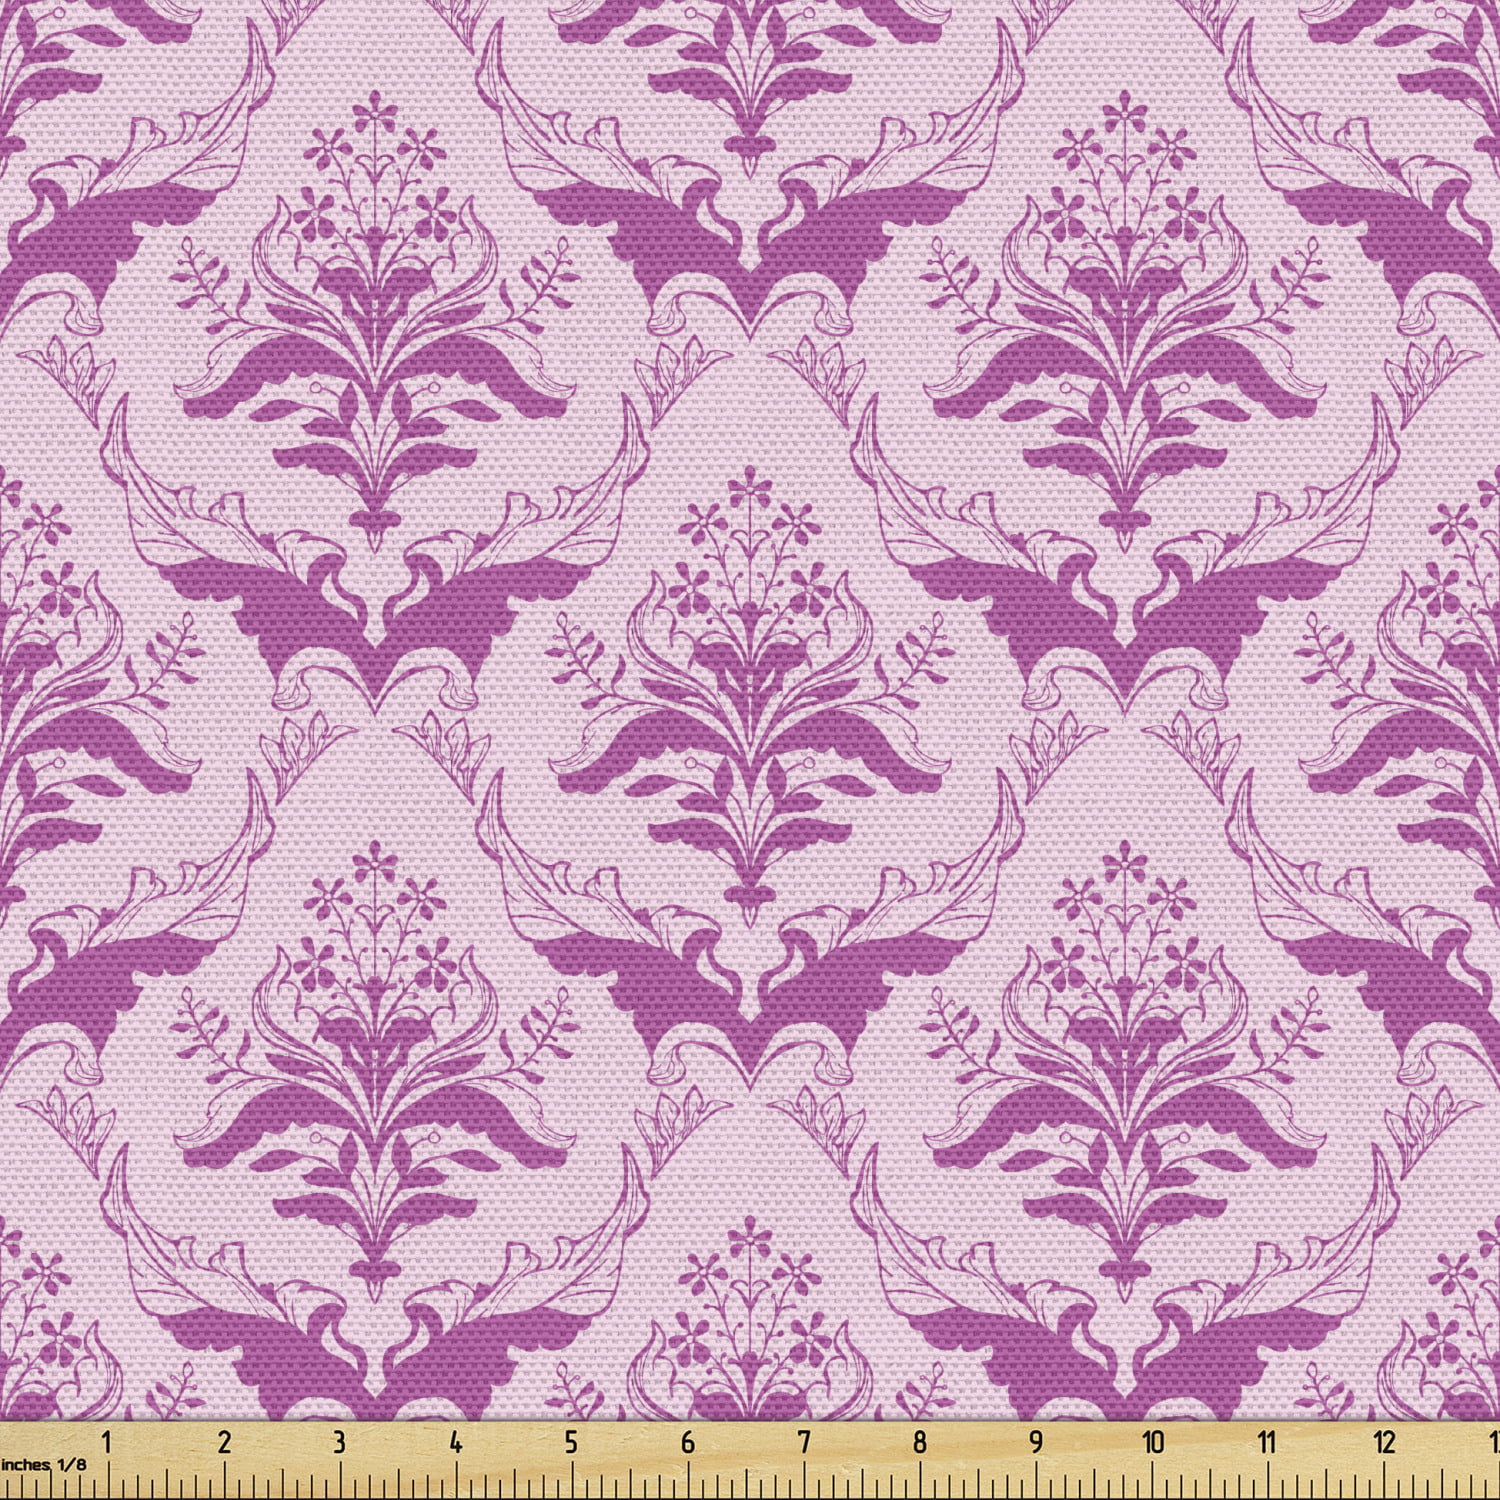 Paisley Vintage Home Decor Edwardian Damask Fabric Printed by Spoonflower BTY 